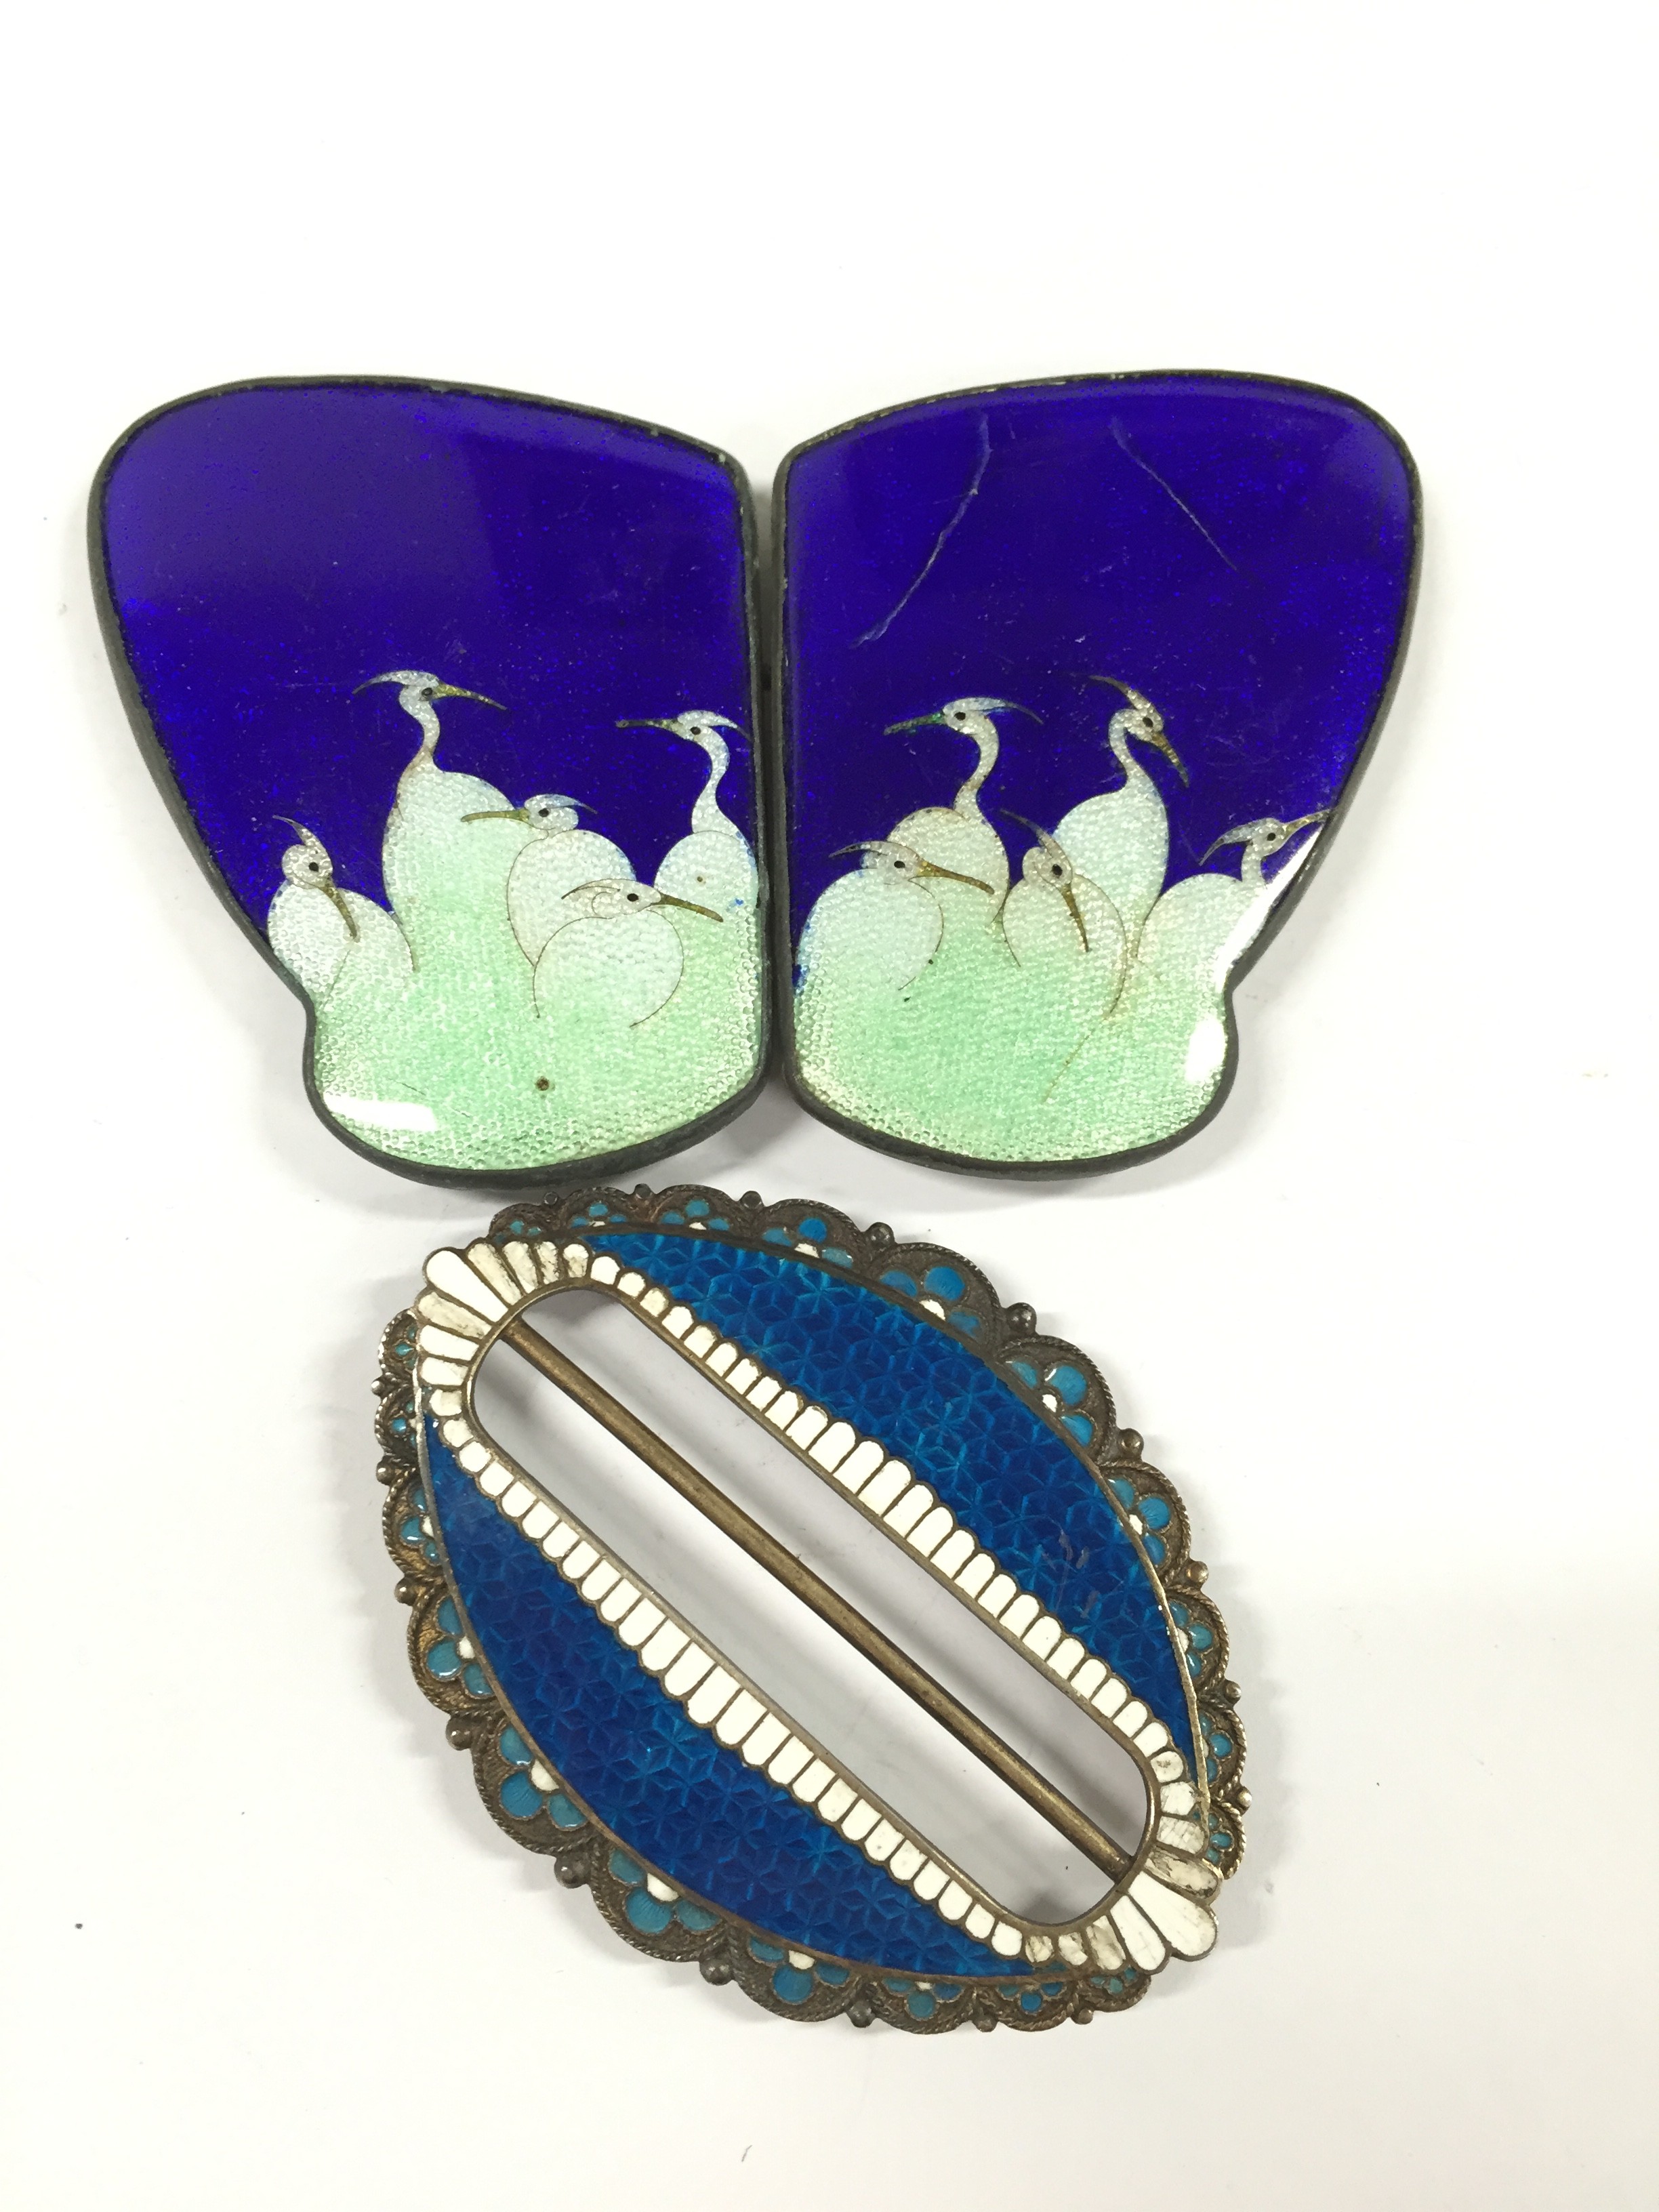 A Marius Hammer silver and enamel buckle together with a Japanese enamel buckle.